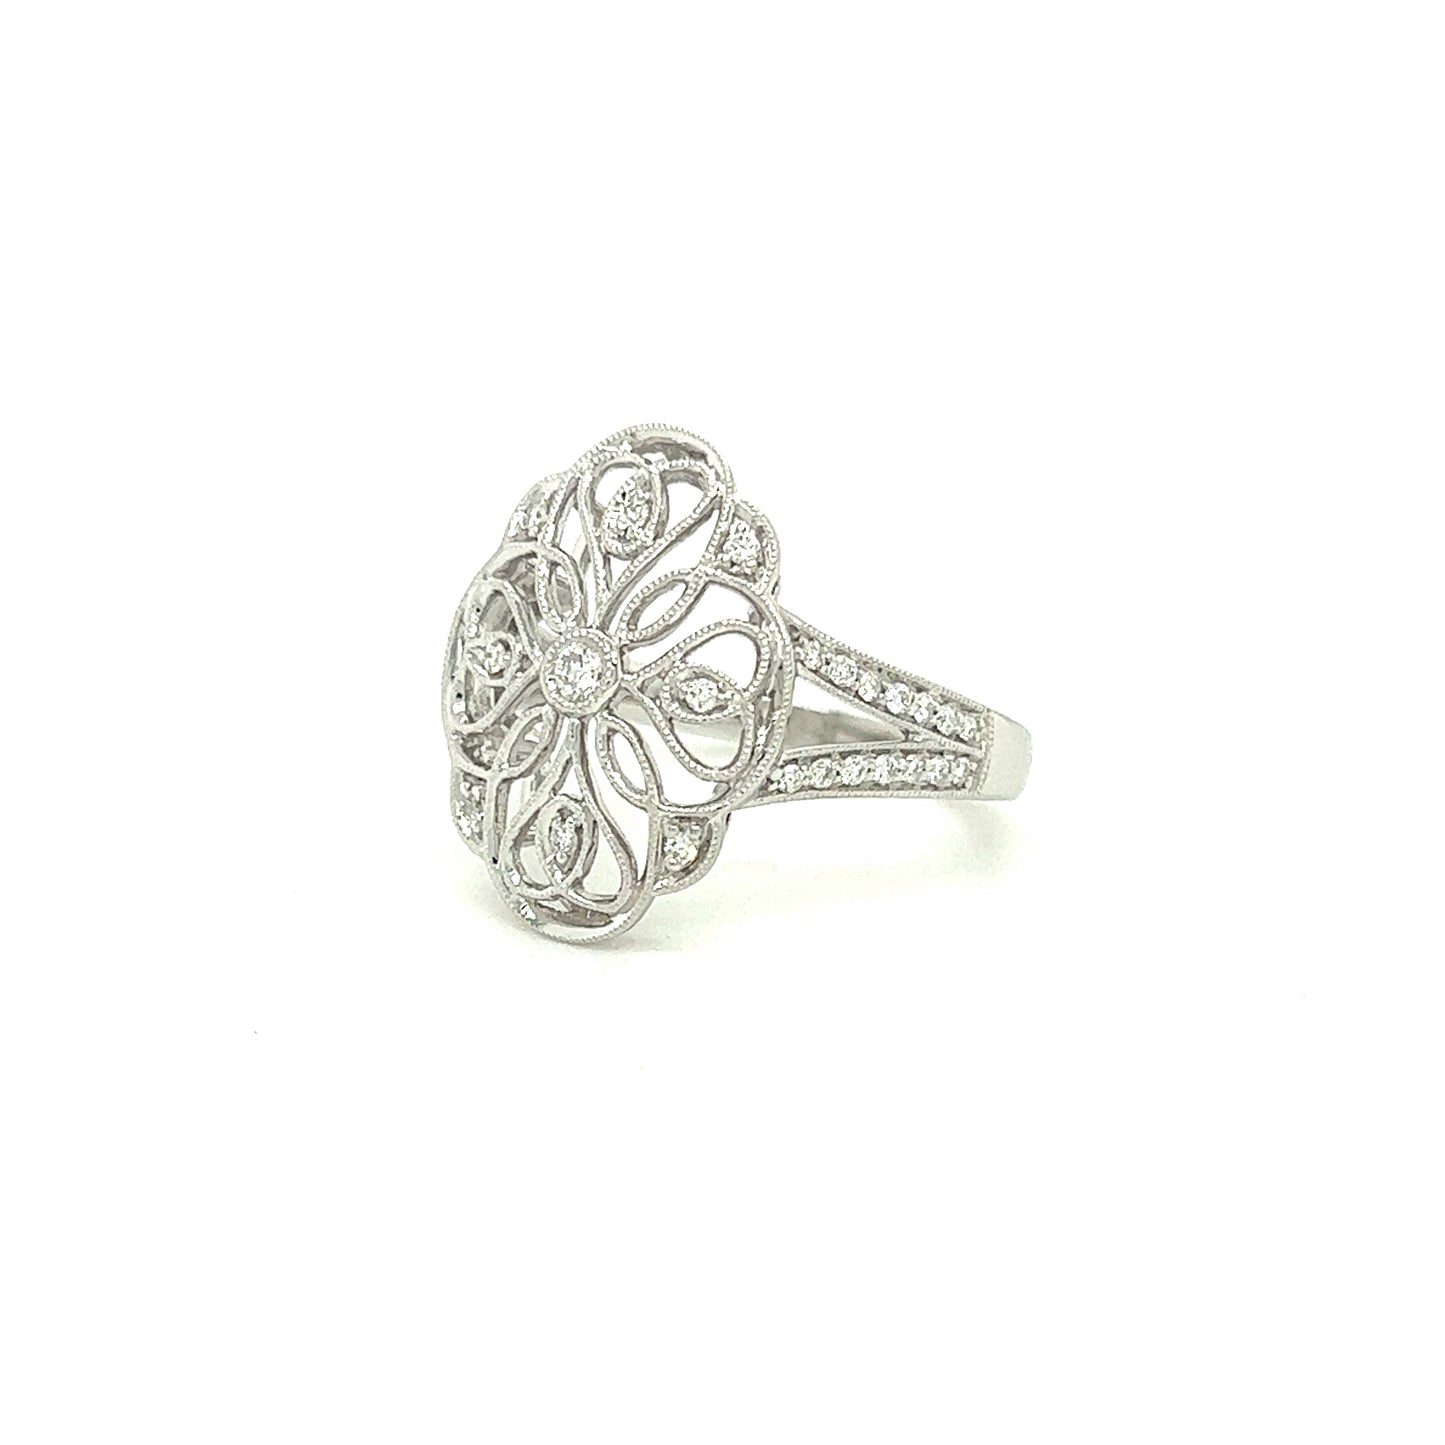 Filigree Diamond Ring with 0.2ctw of Diamonds in 14K White Gold Right Side View